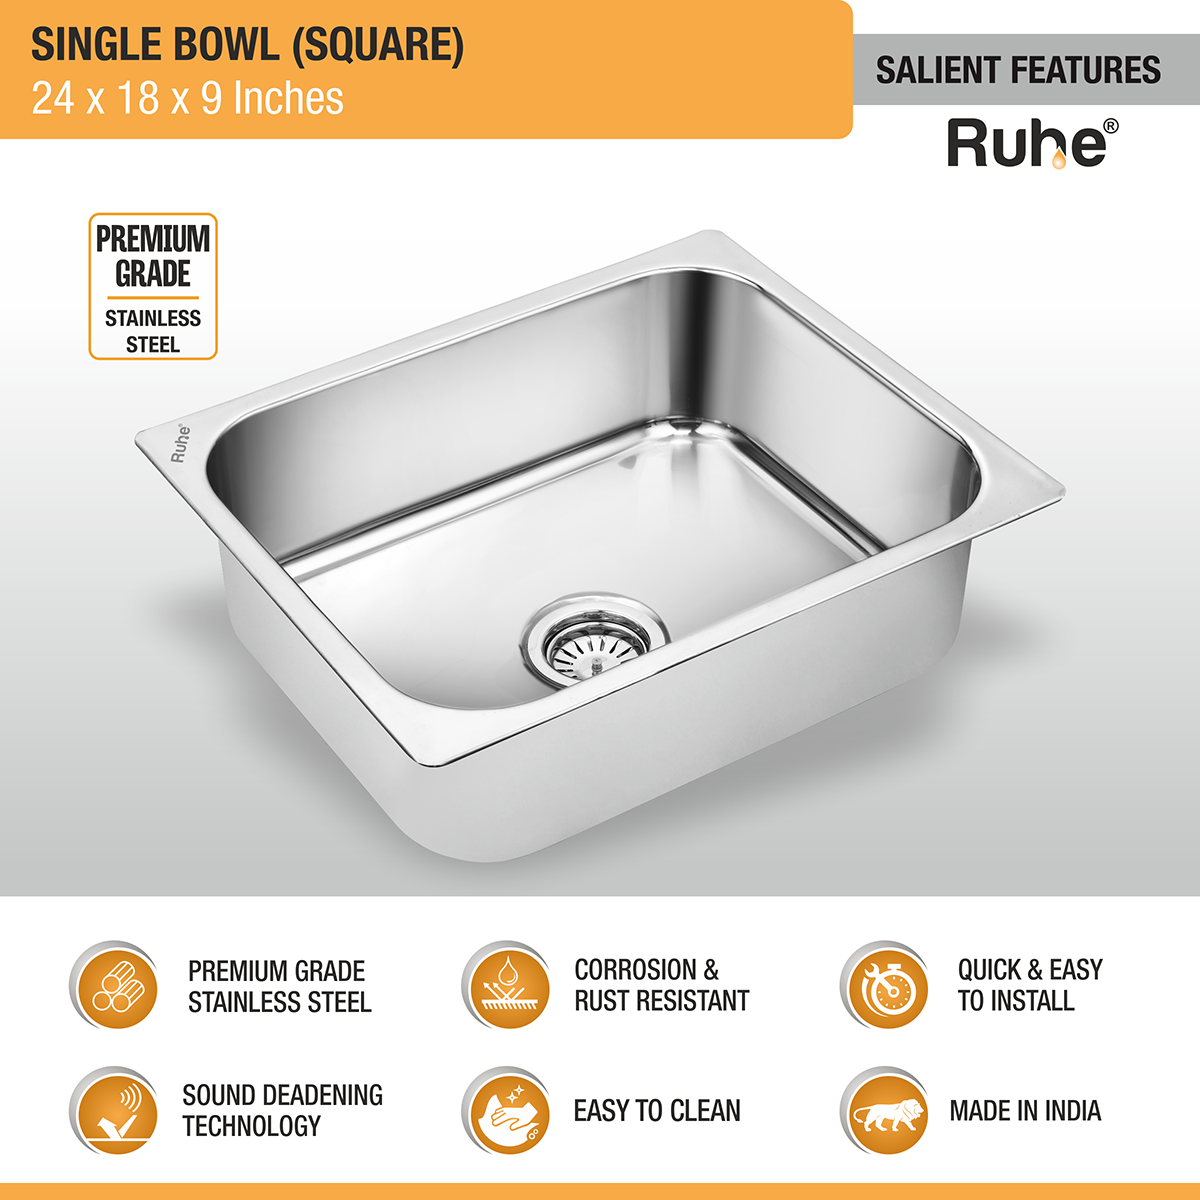 Square Single Bowl Kitchen Sink (24 x 18 x 9 inches) features and benefits